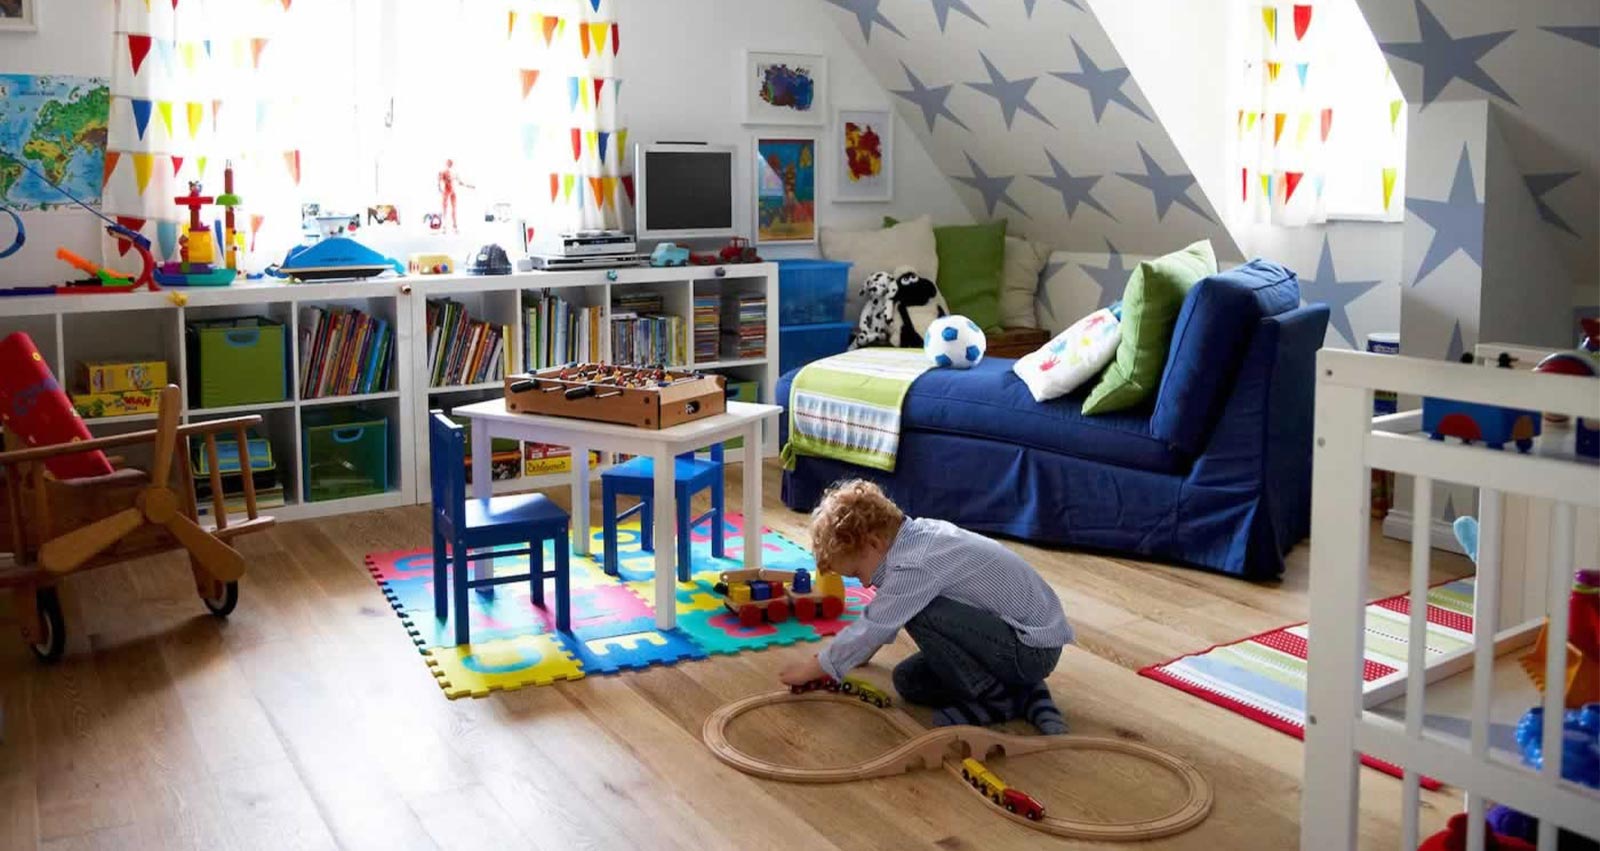 IKEA-Simple ideas for a childrens bedroom 06y